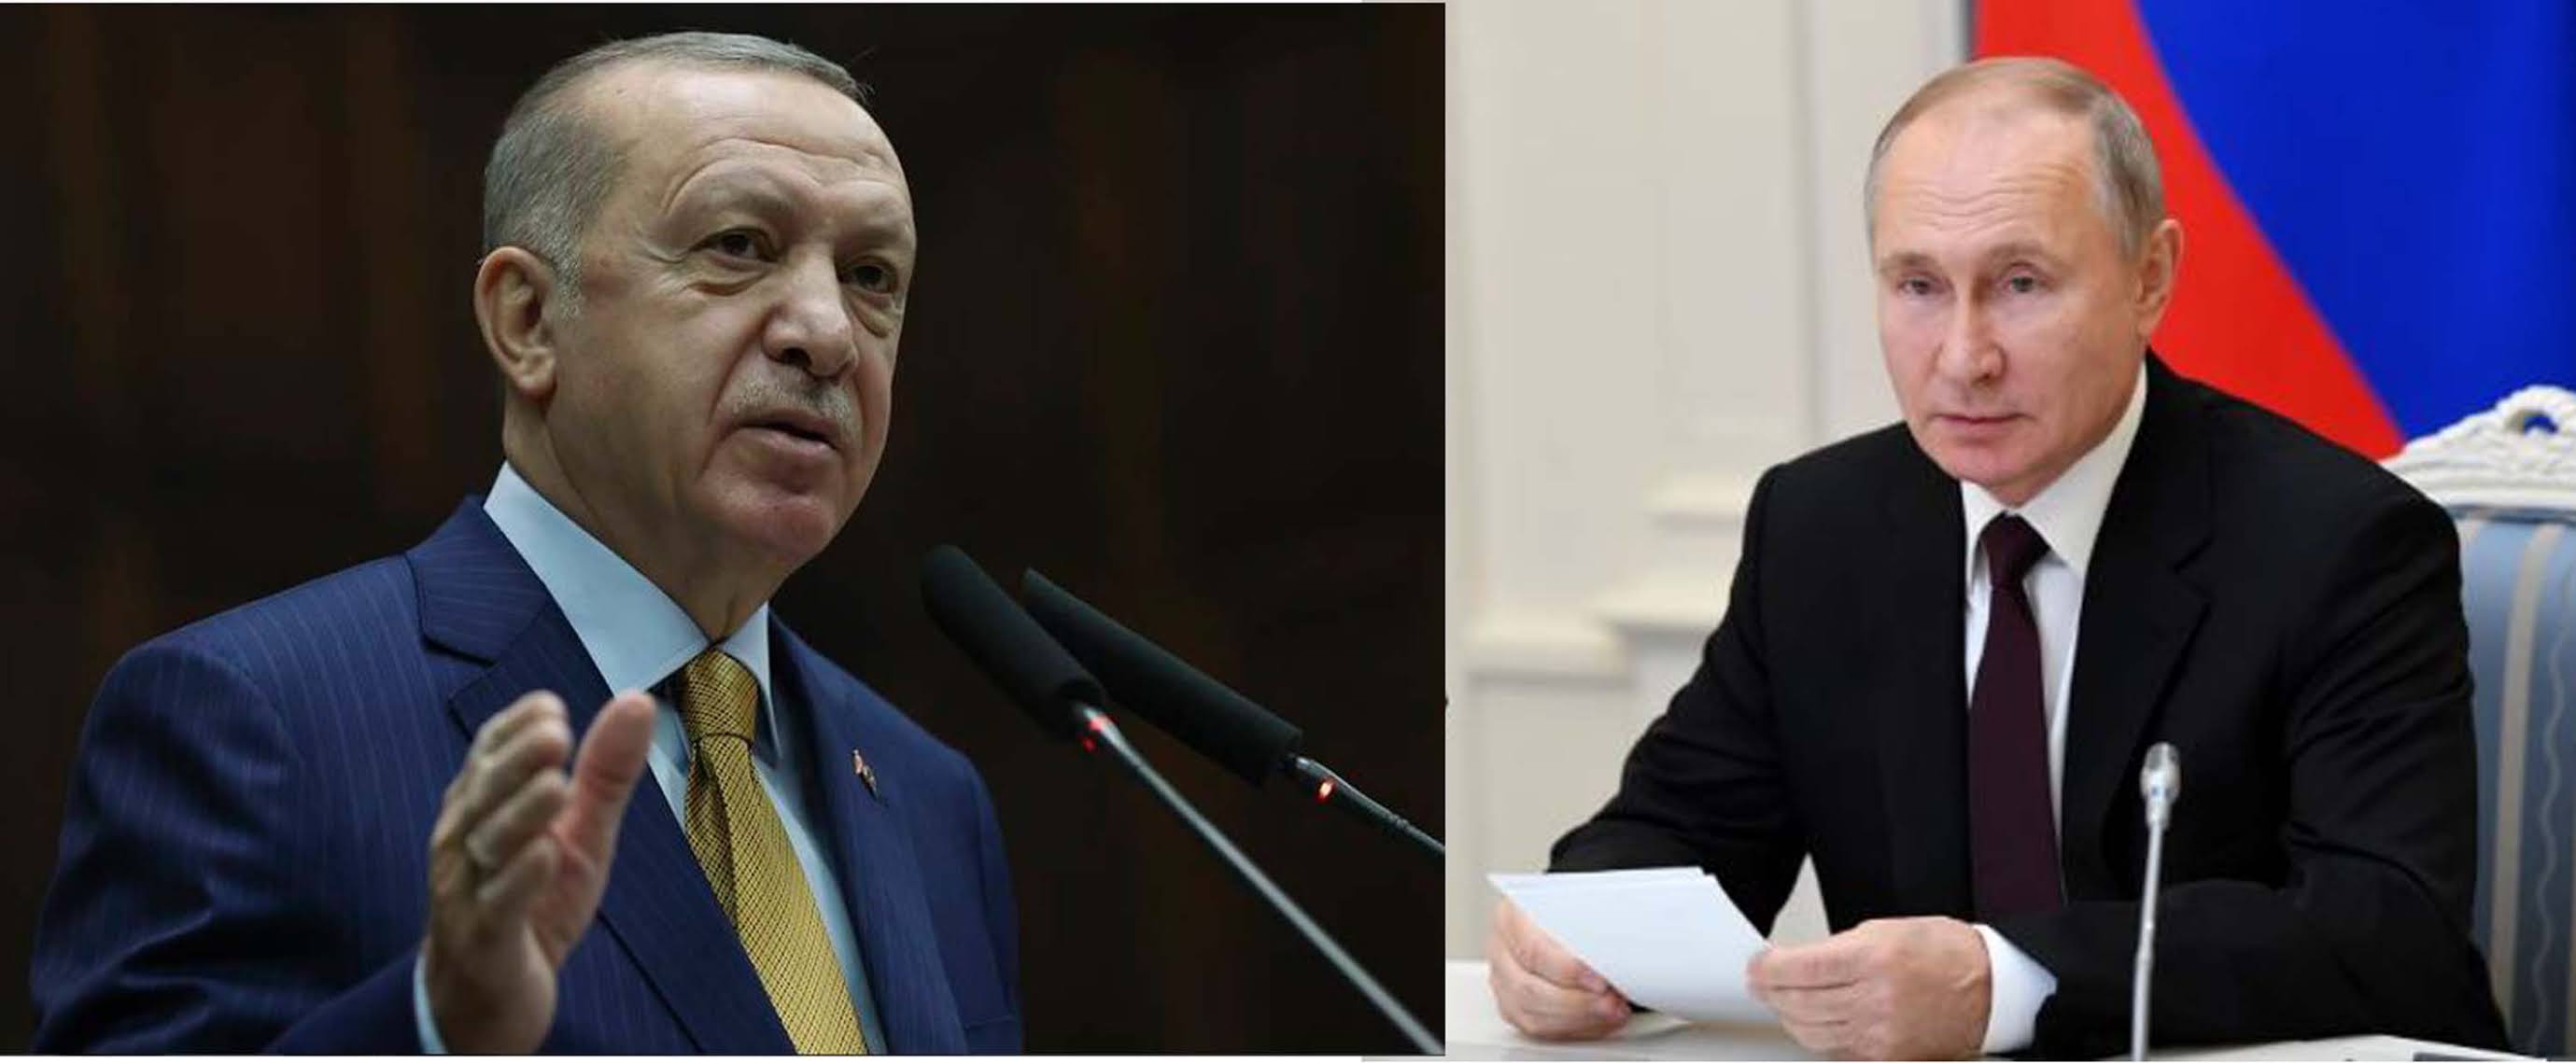 Erdogan reveals he also believes Putin to be a man of his word